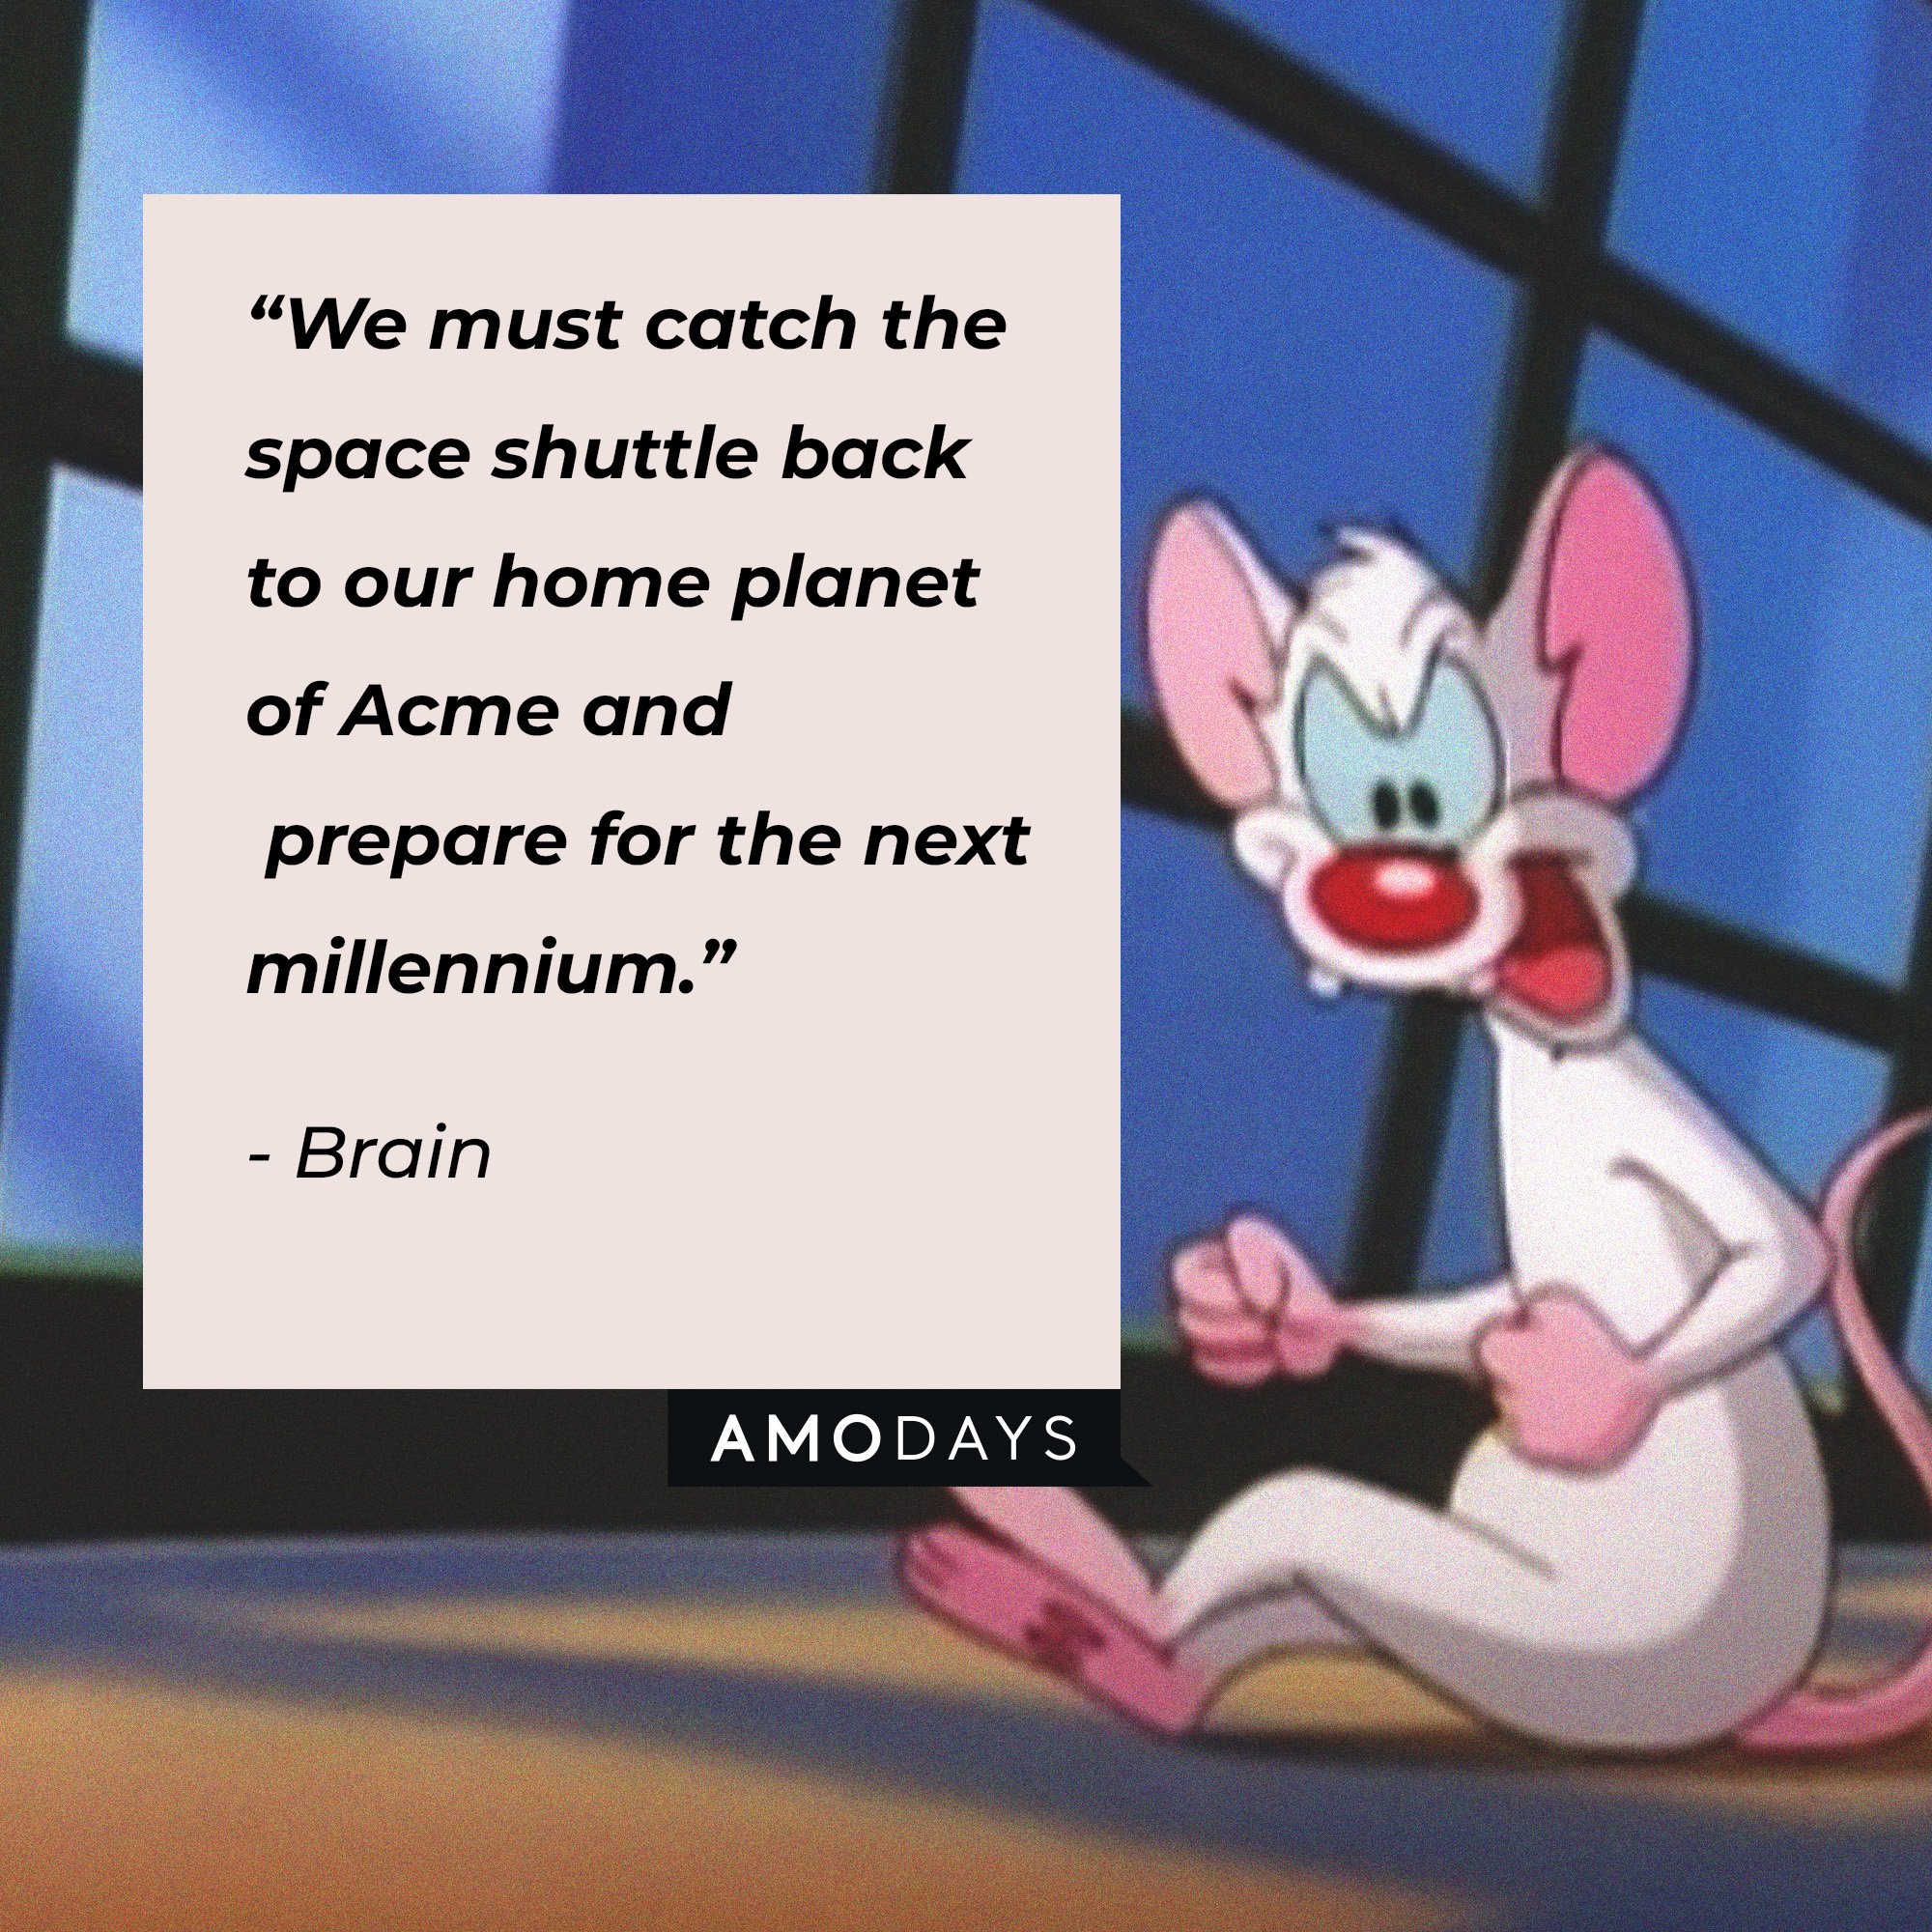 Brain's quote: “We must catch the space shuttle back to our home planet of Acme and prepare for the next millennium.” | Image: AmoDays